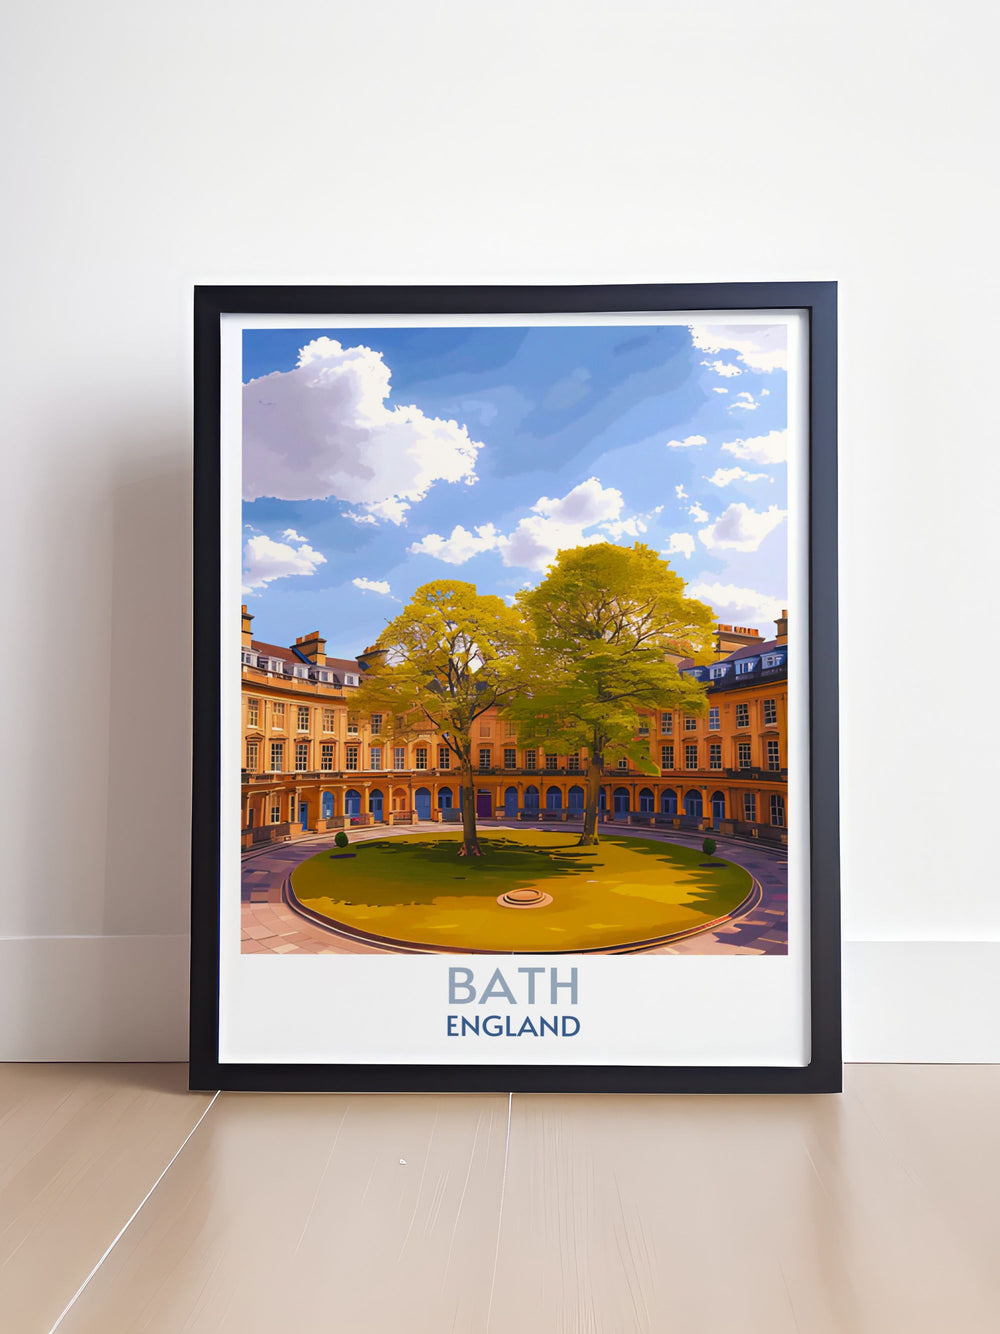 Stunning visual of The Circus in Bath, England, in exquisite detail perfect wall decor for those who appreciate English heritage.